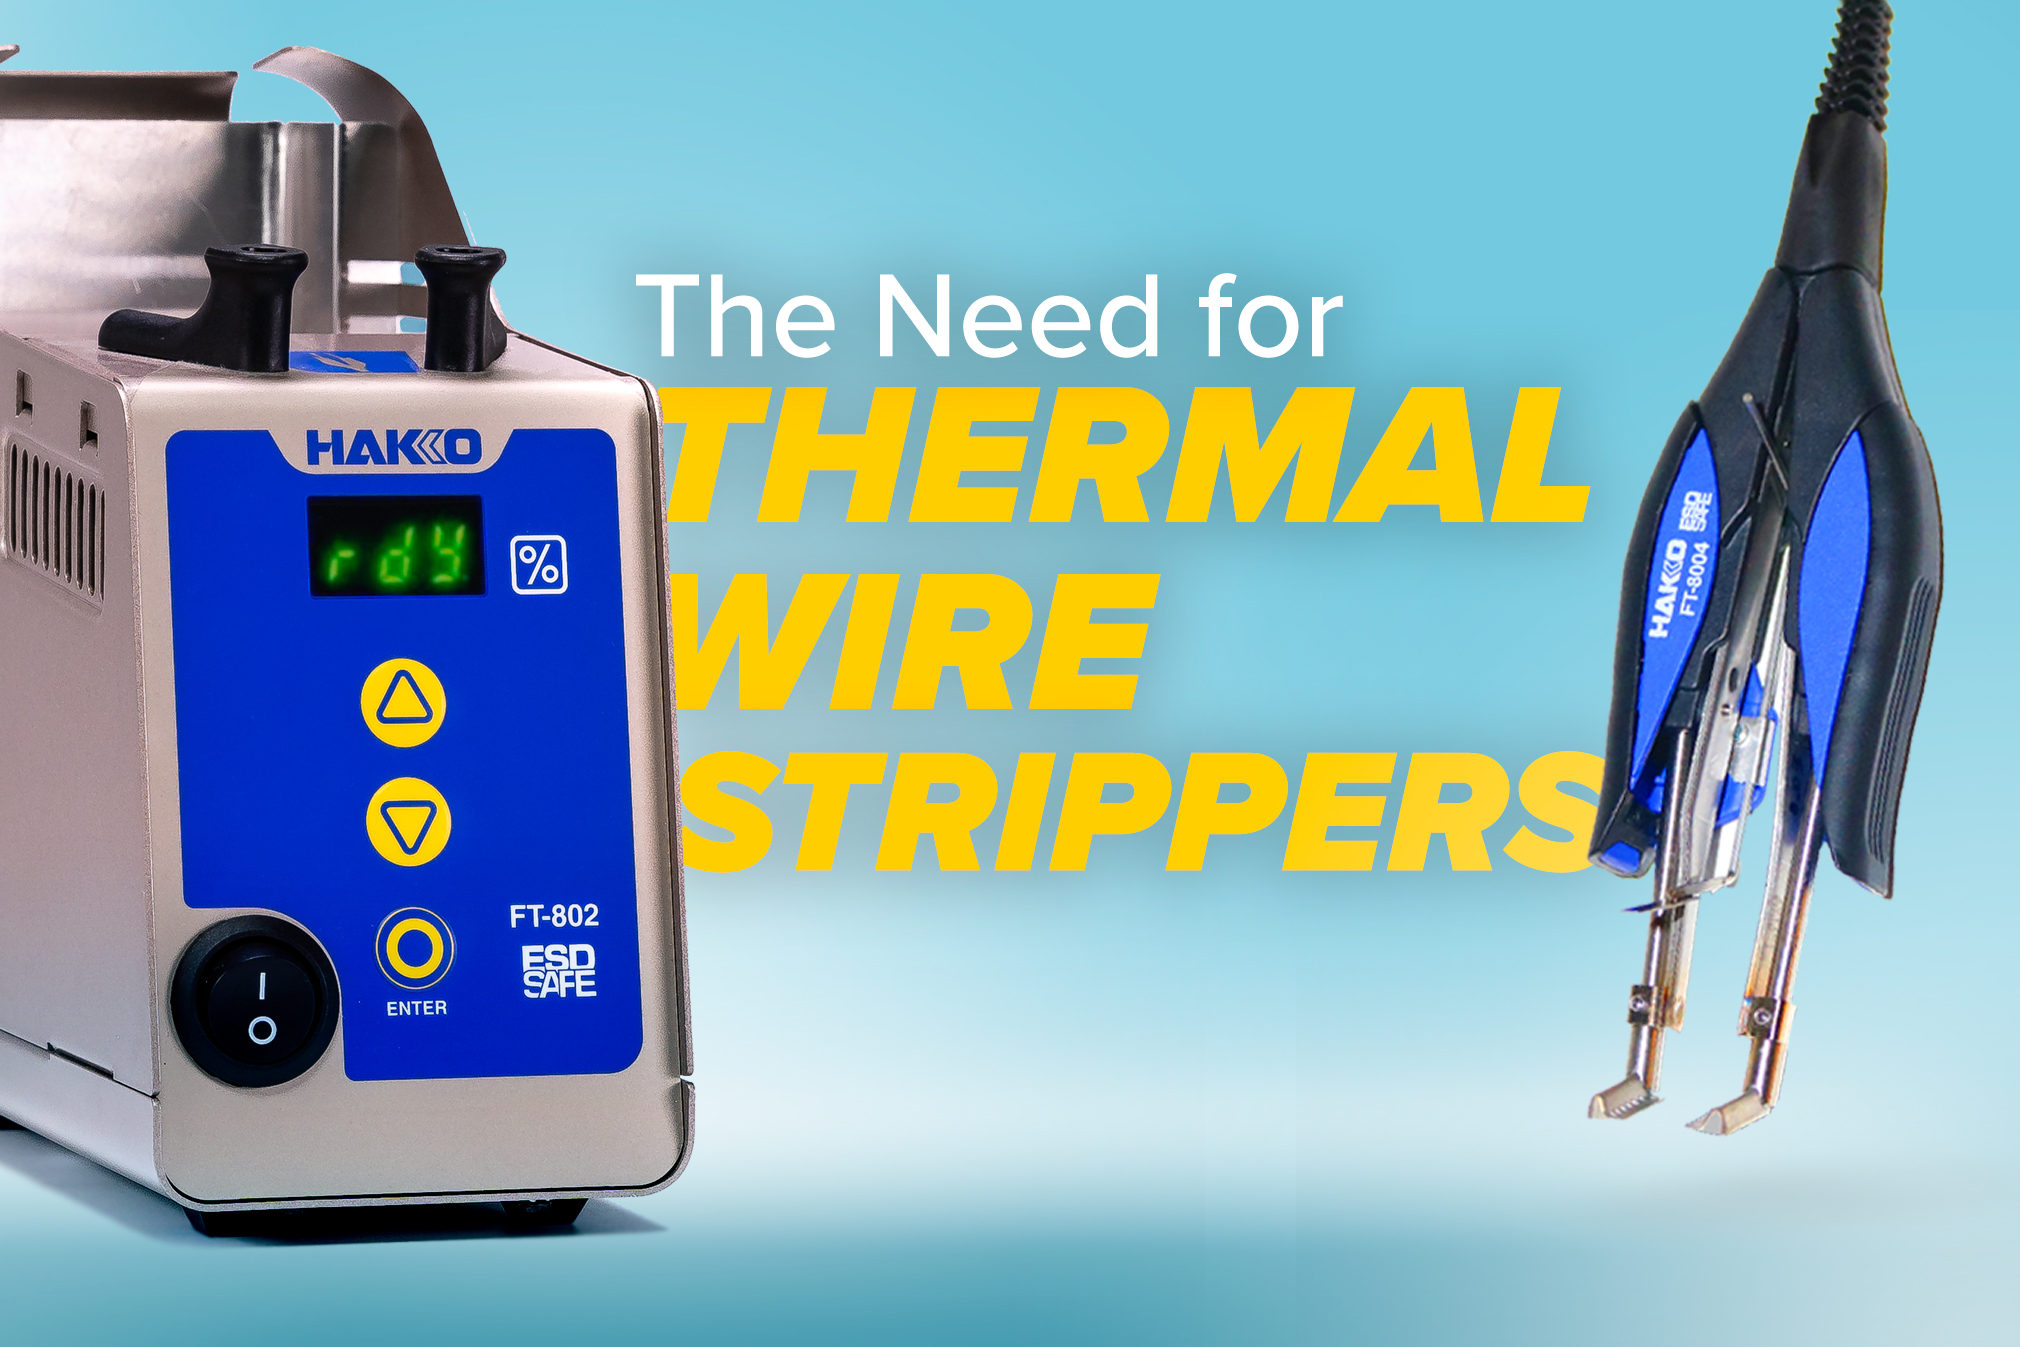 The Need for Thermal Wire Strippers